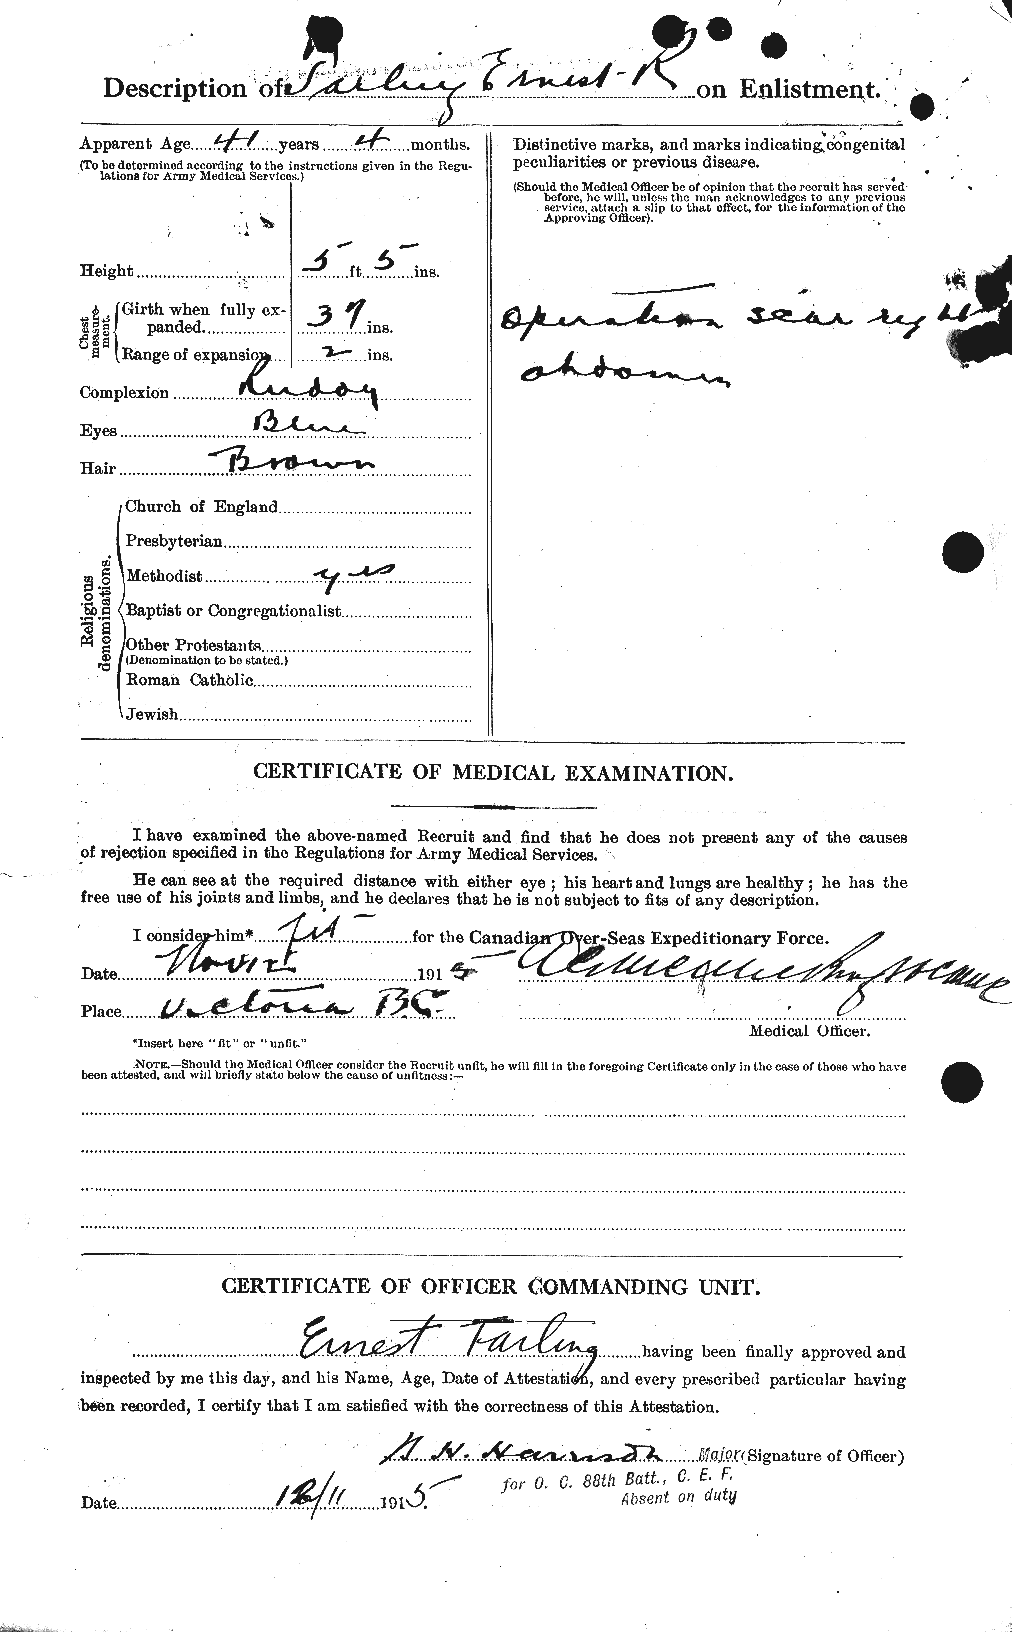 Personnel Records of the First World War - CEF 625189b